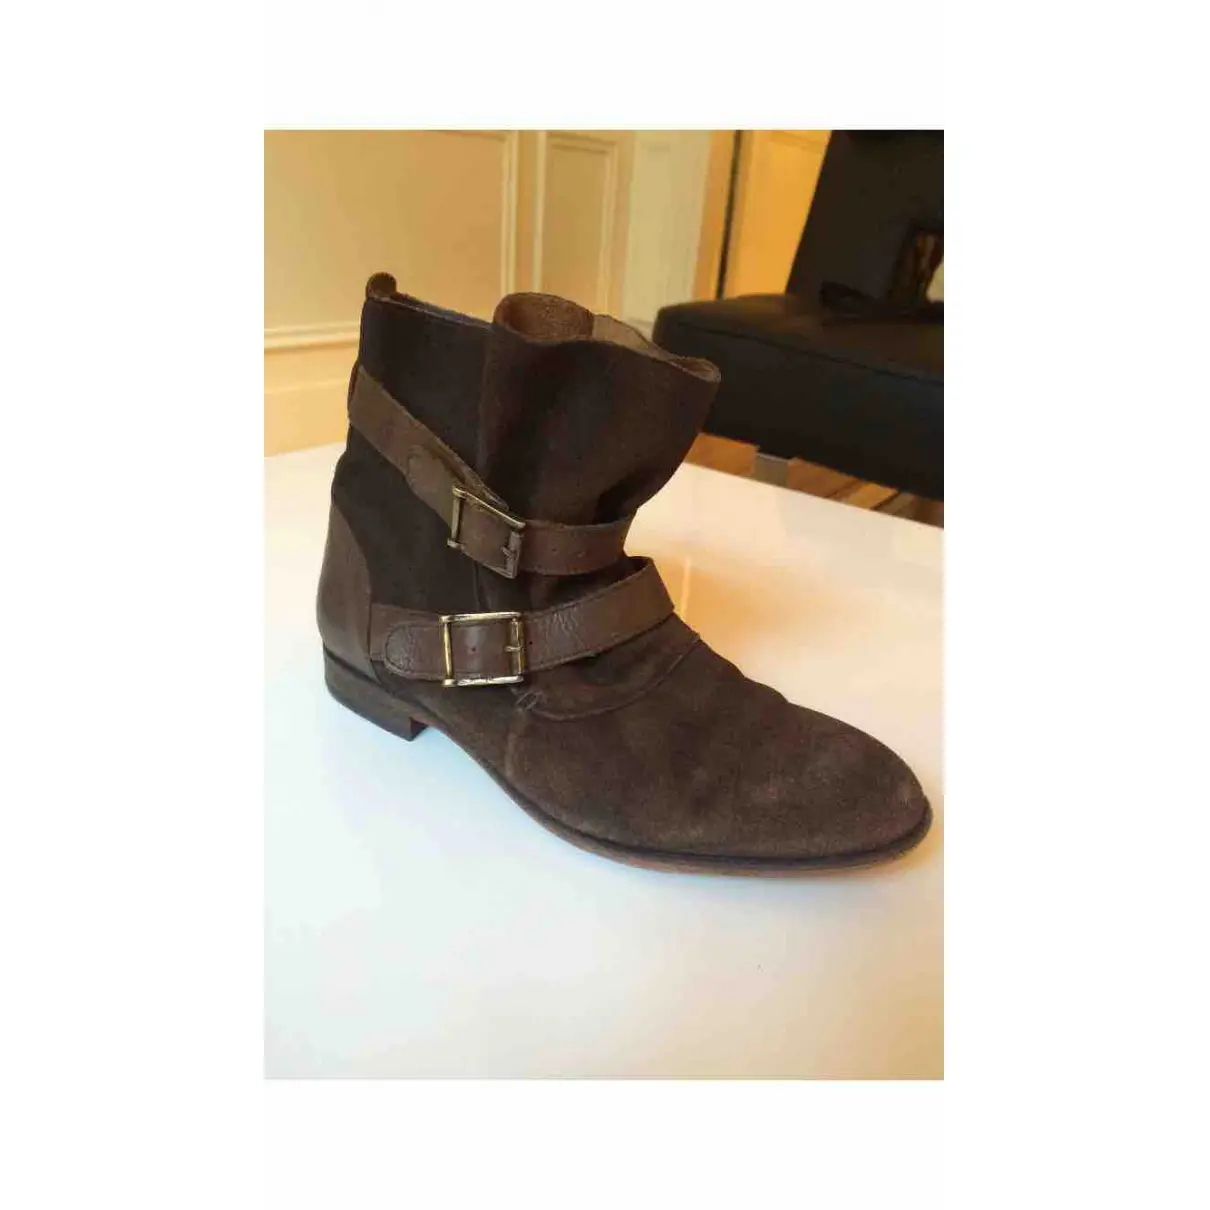 H by Hudson Leather buckled boots for sale